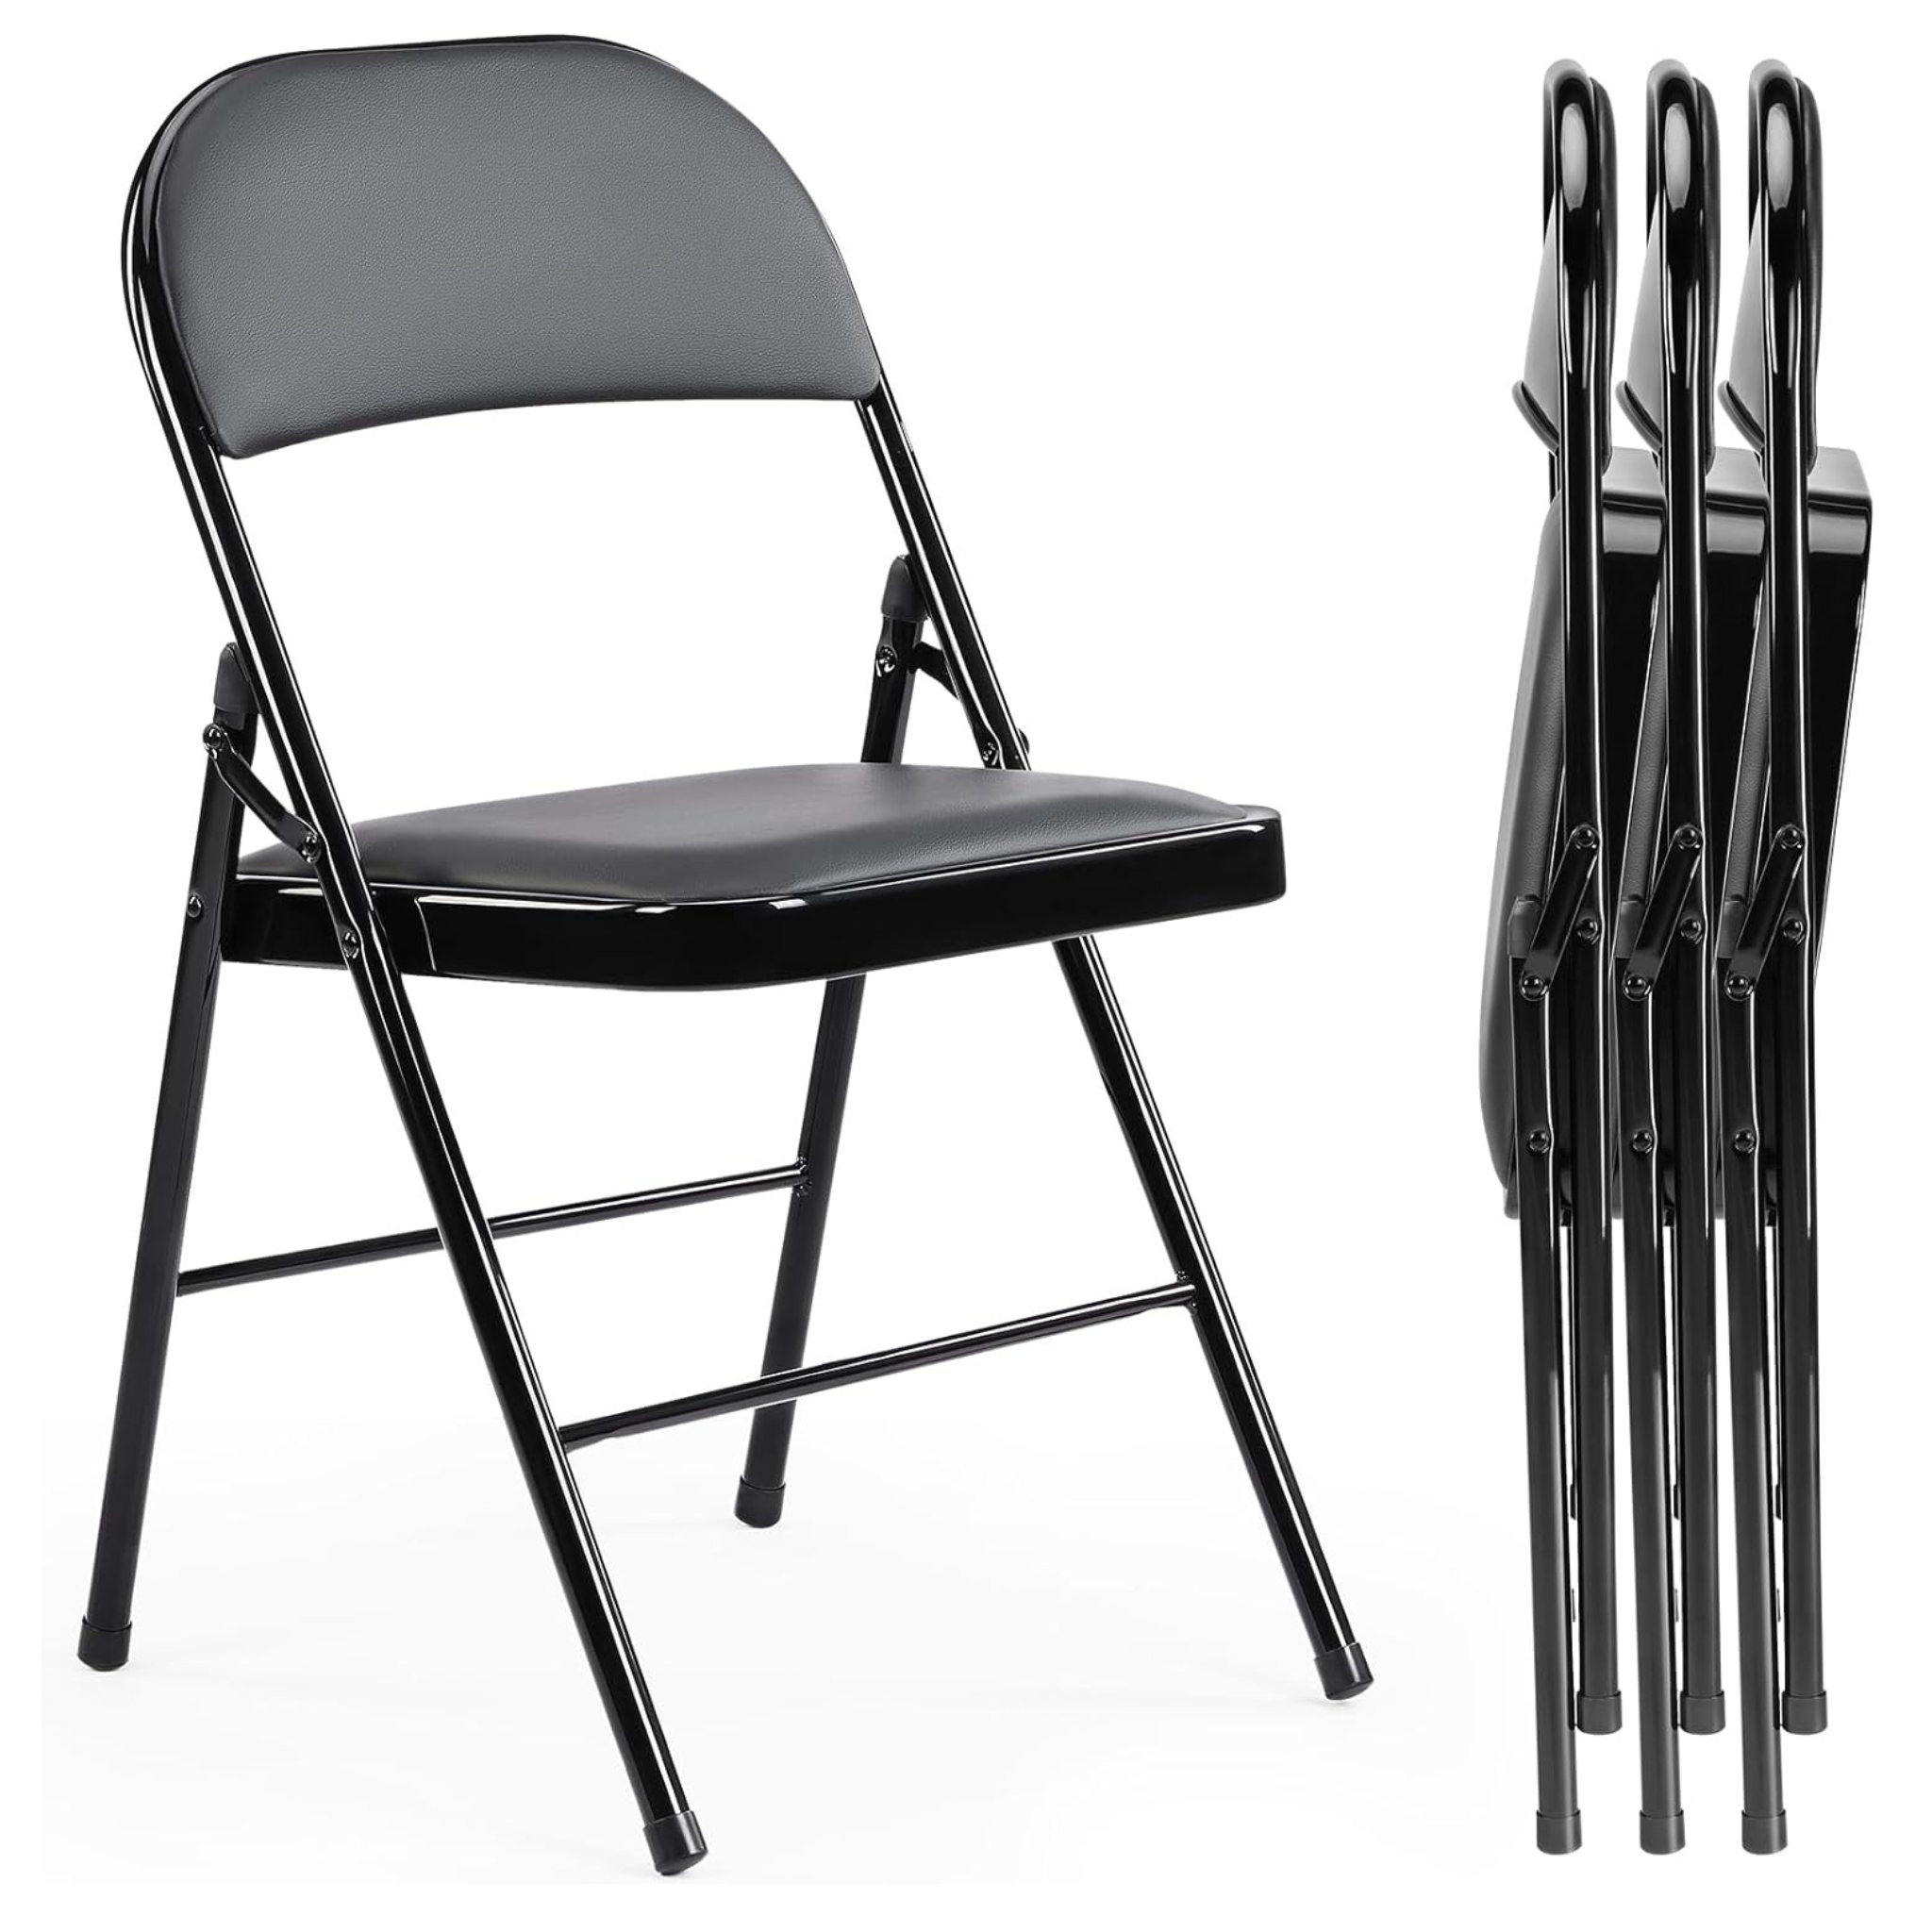 4 Leather Padded Folding Chairs